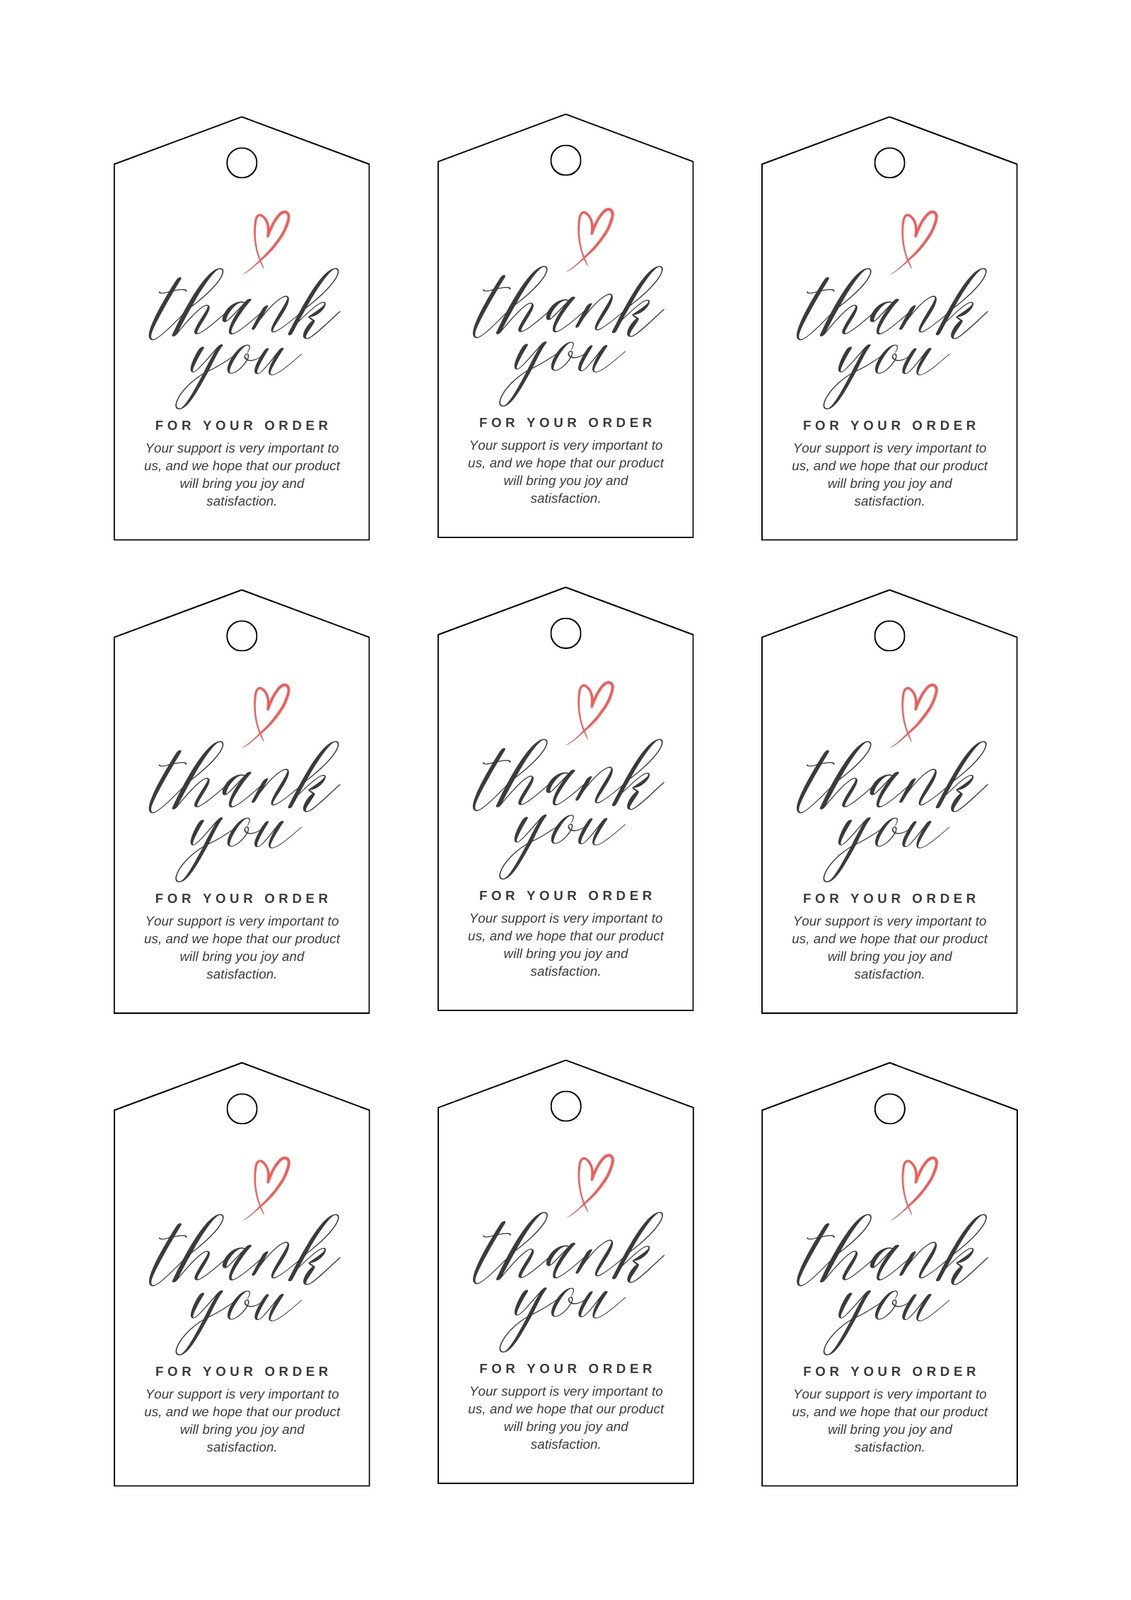 Free, Printable And Customizable Gift Tag Templates | Canva with Free Online Gift Tags Printable